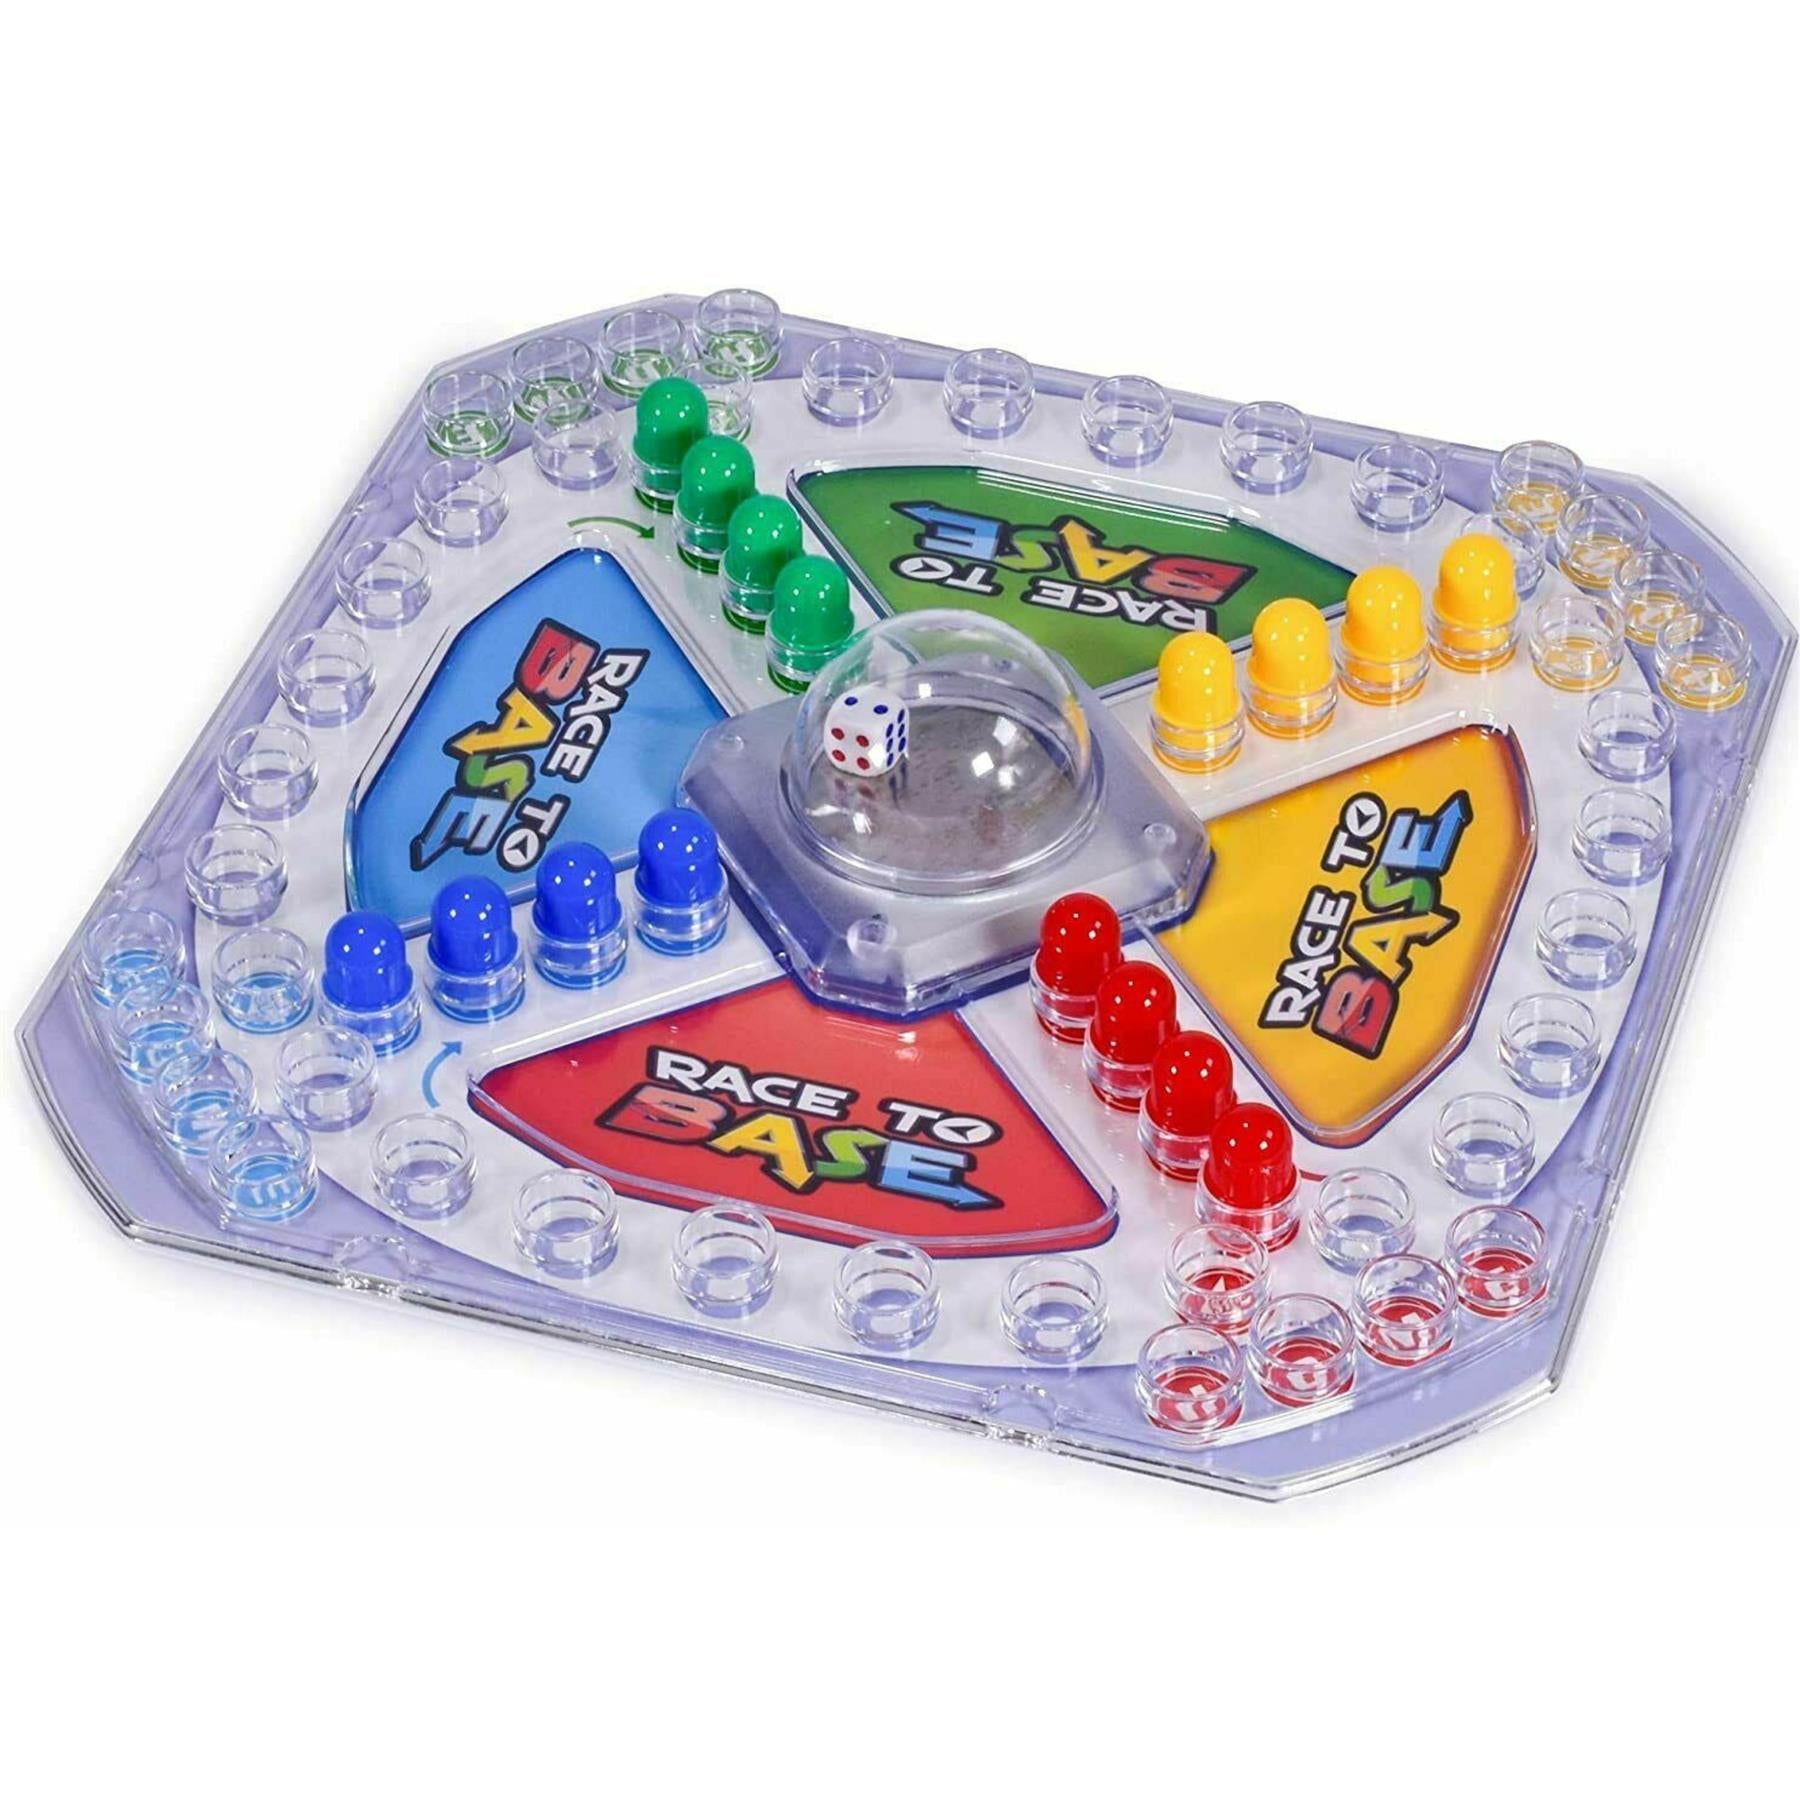 The Magic Toy Shop Race To Base Kids Board Game